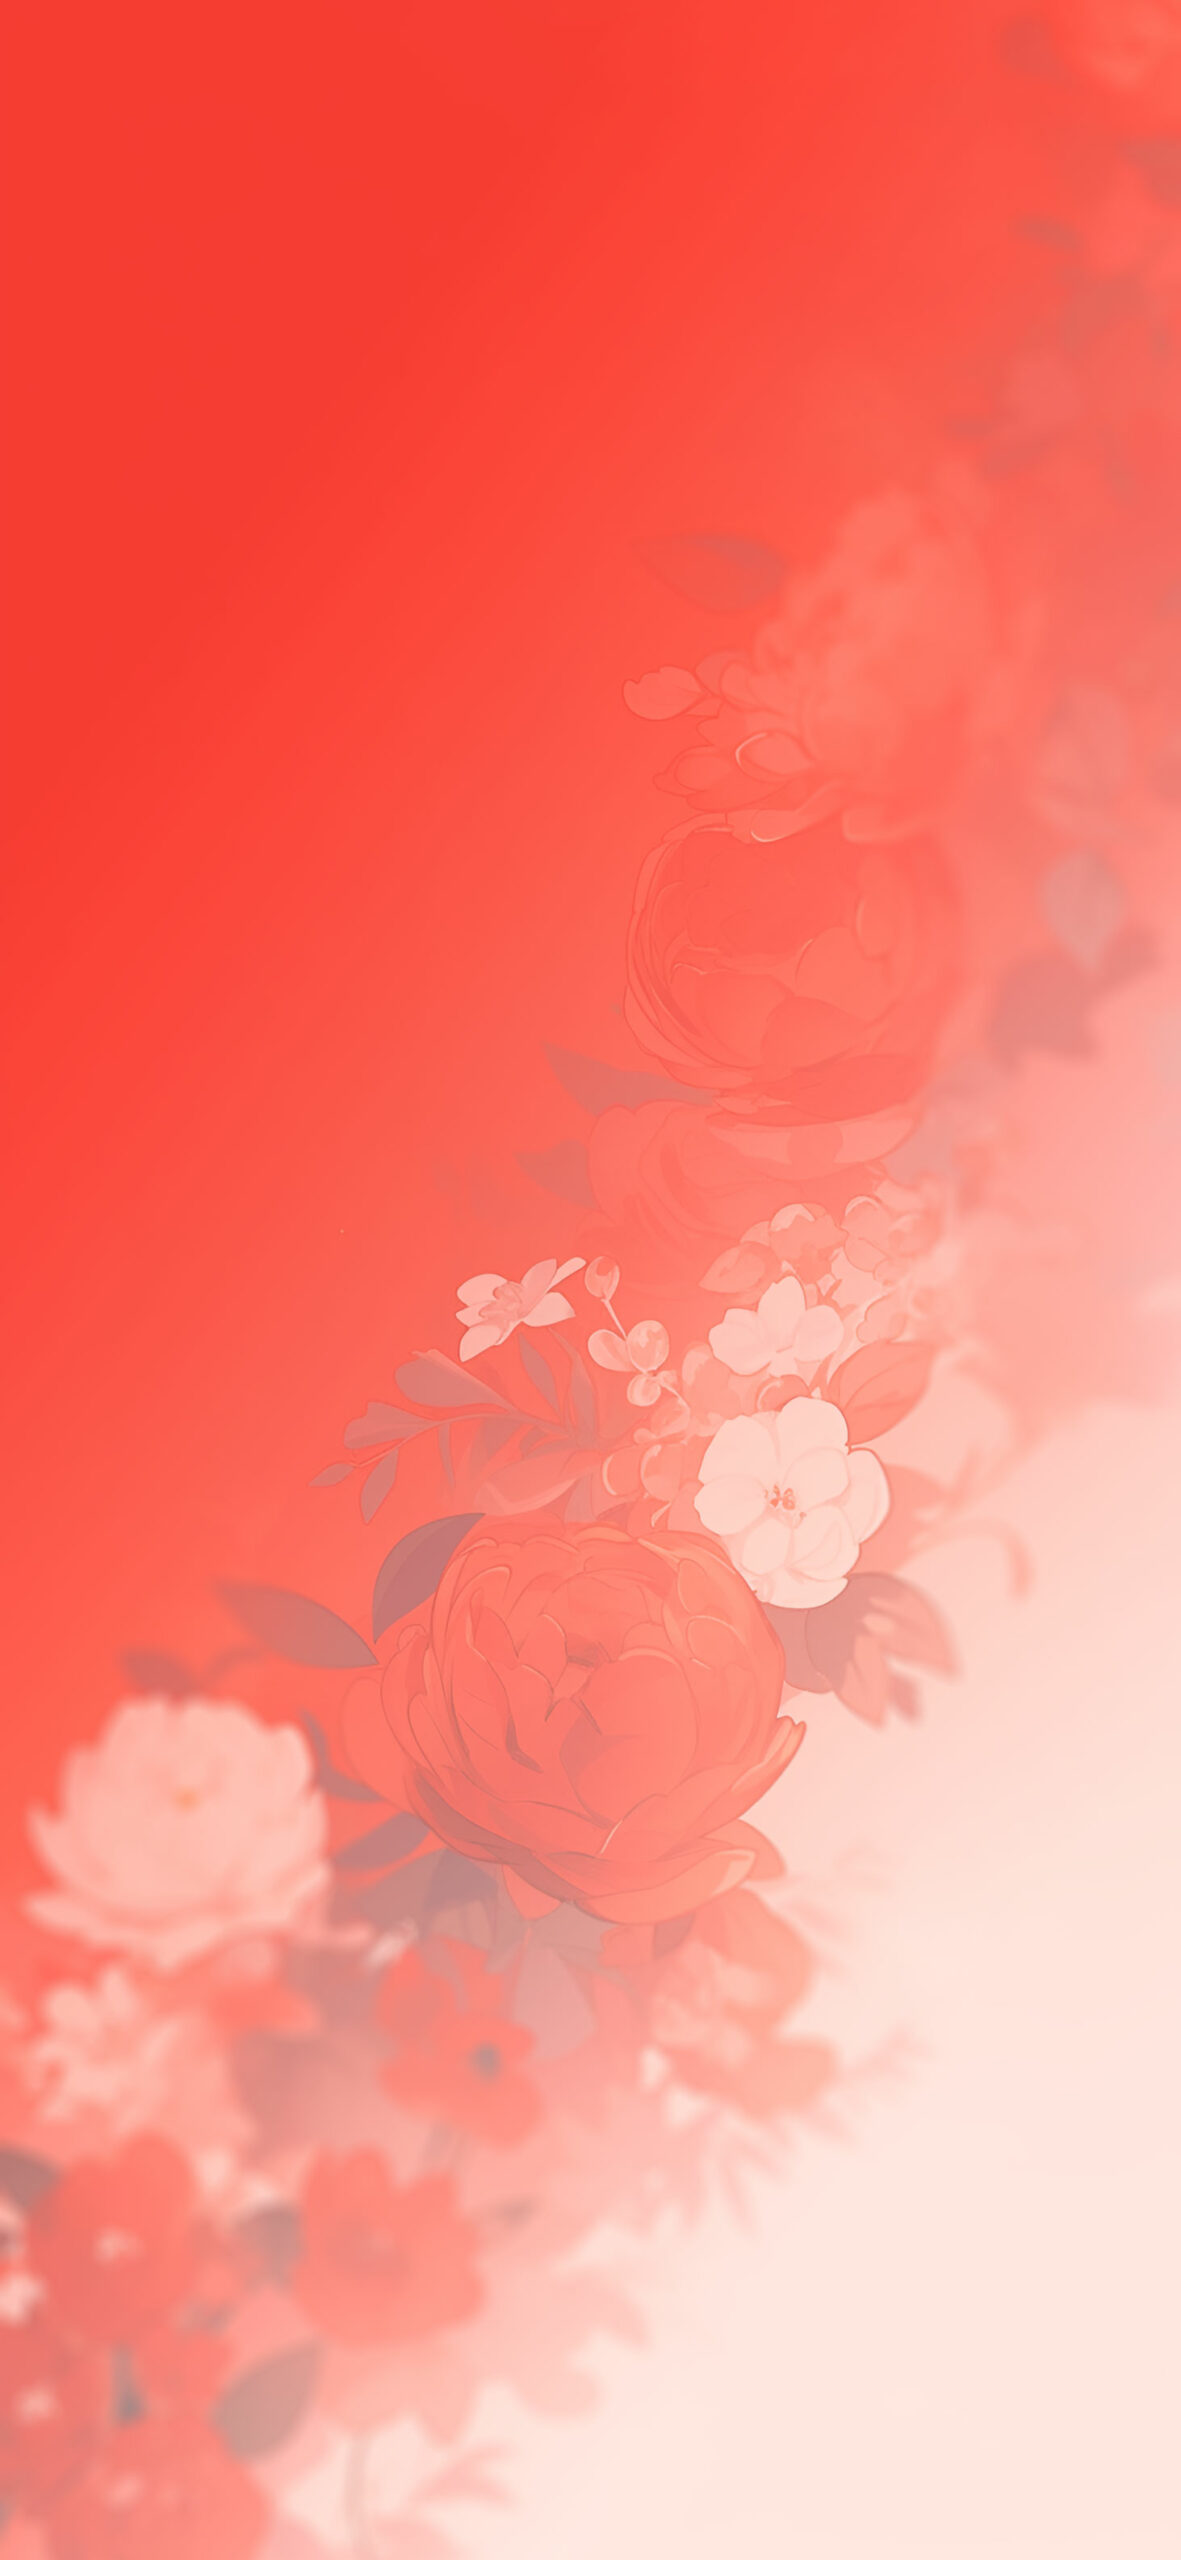 Red & white flowers beautiful wallpaper Cool floral wallpaper